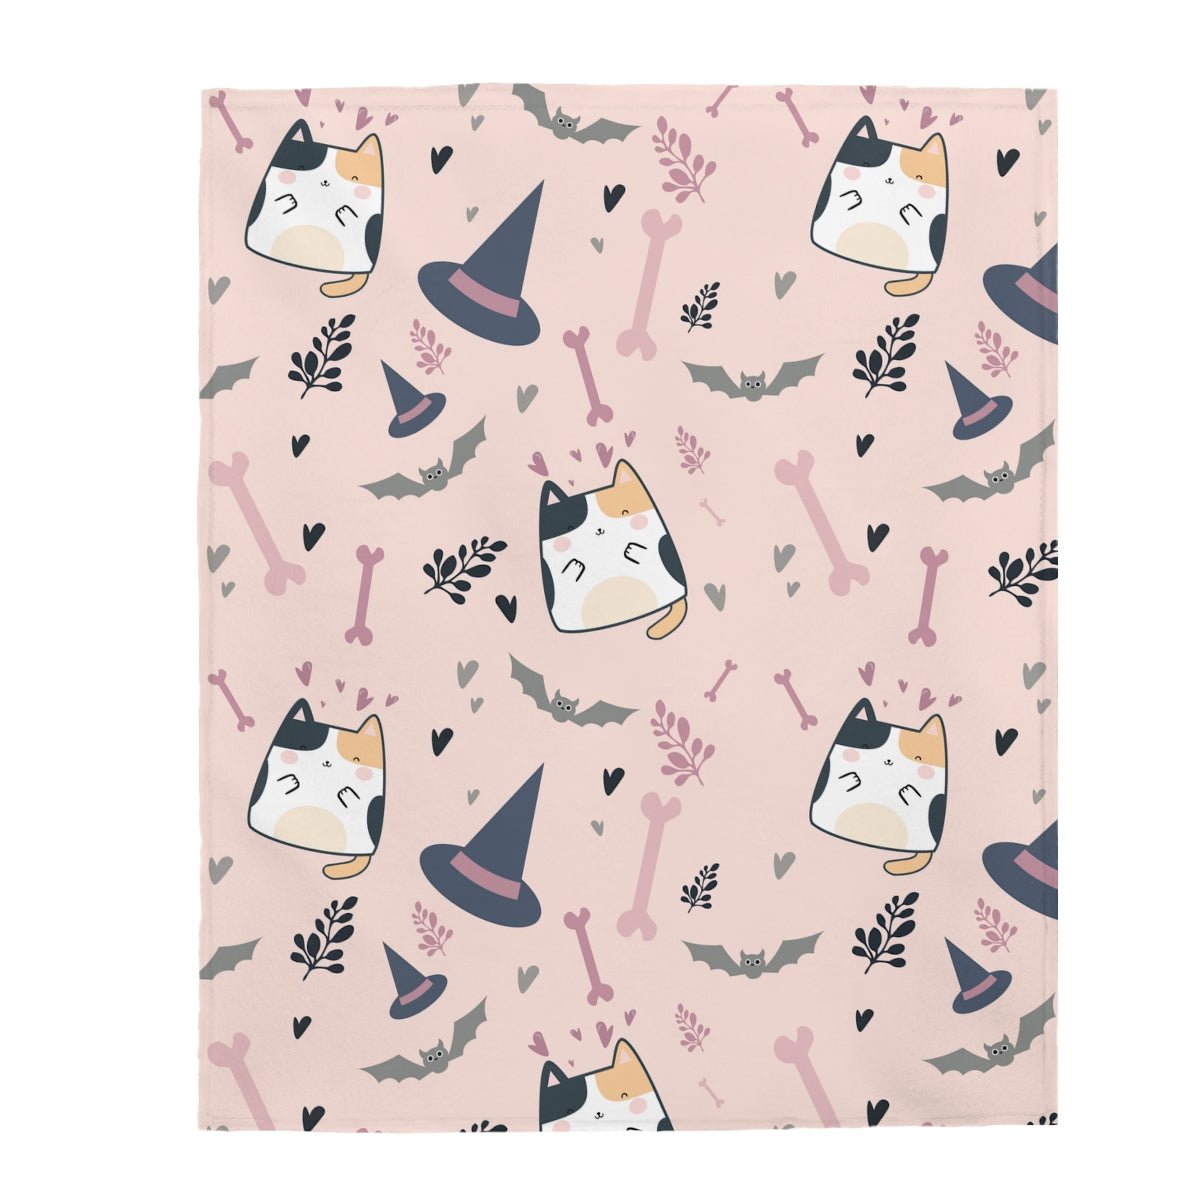 Halloween Cats and Bats Velveteen Plush Blanket - Puffin Lime